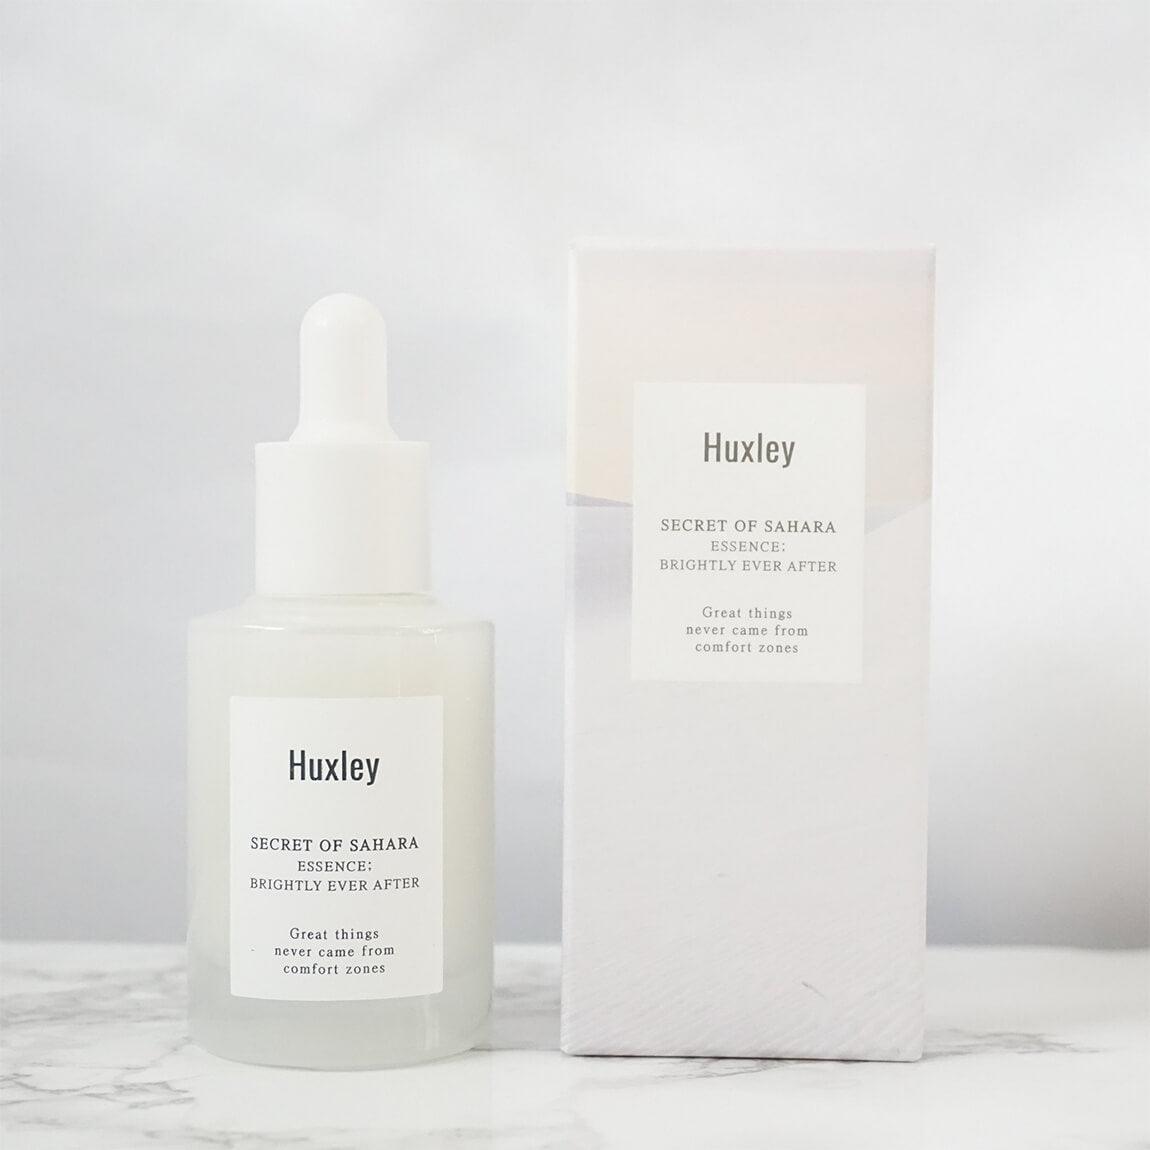 Huxley Essence Brightly Ever After 30ml from Huxley